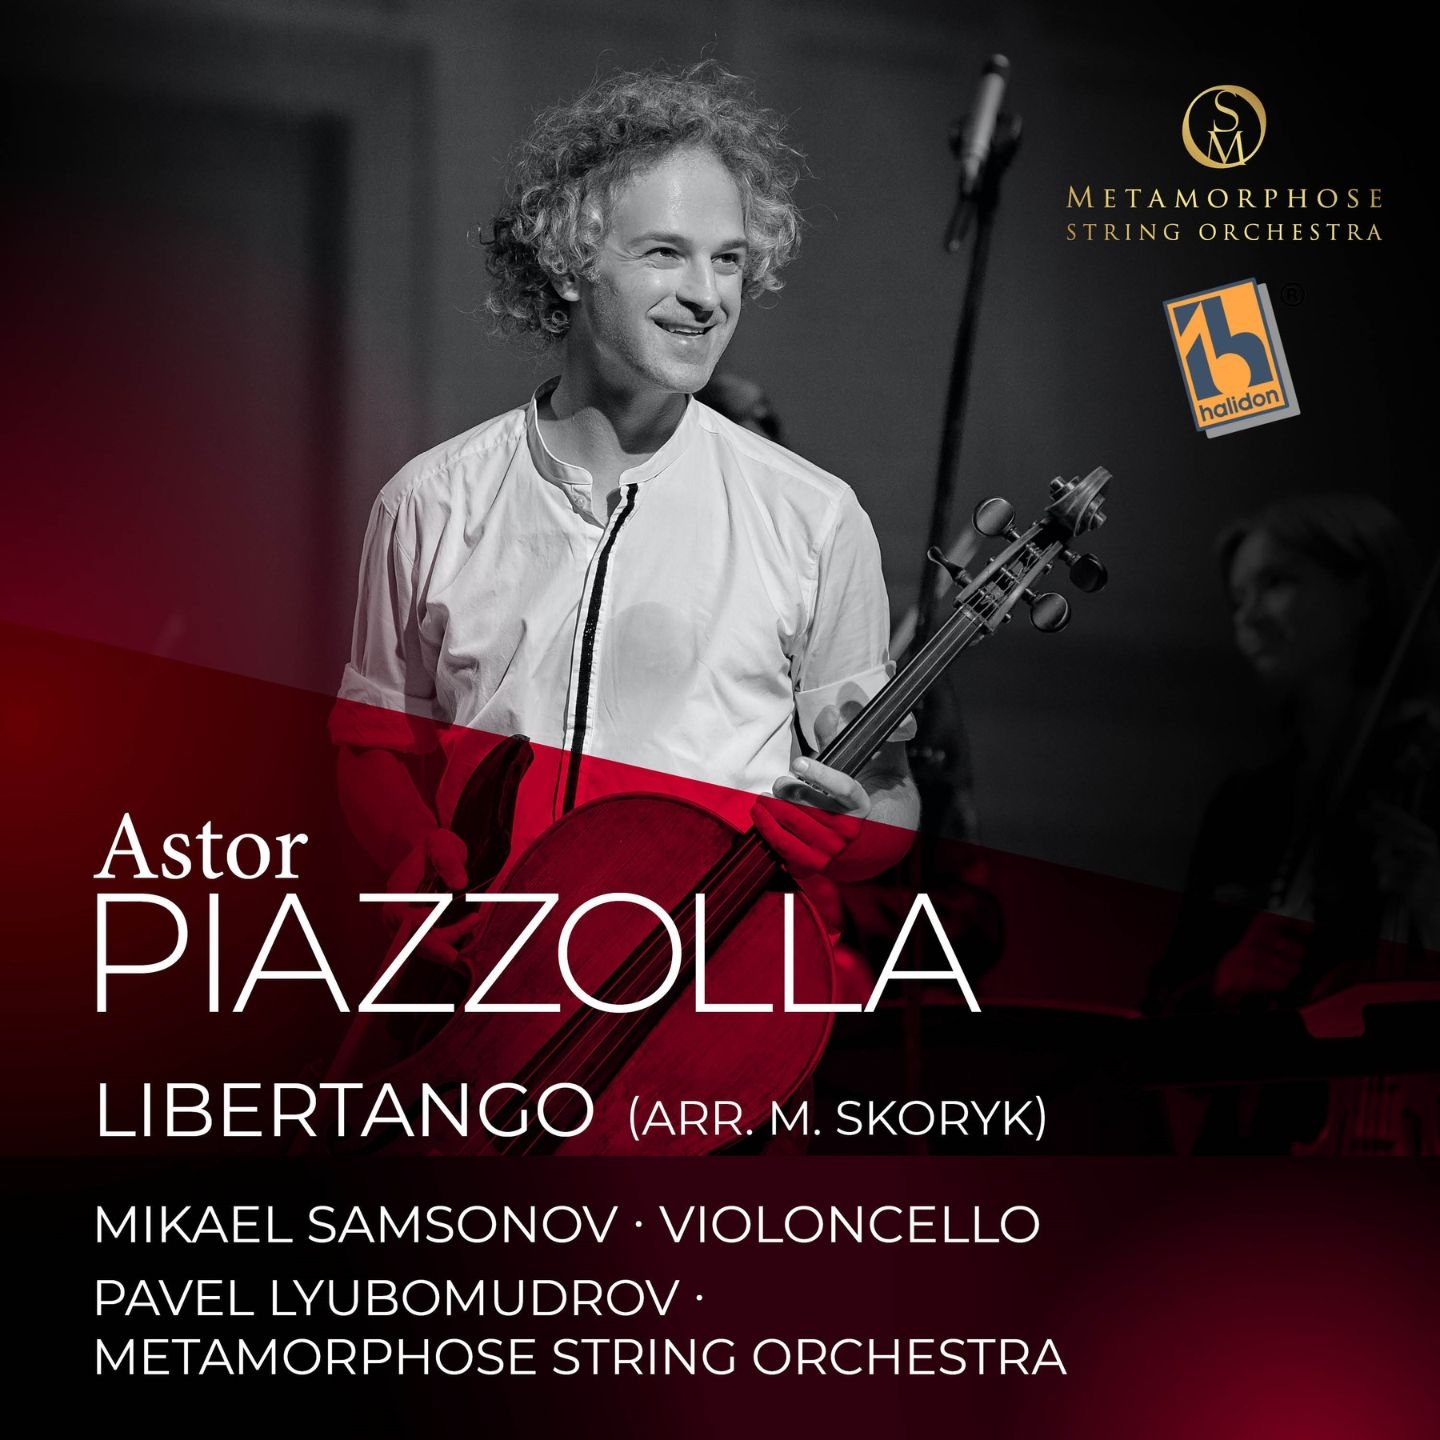 Piazzolla: Libertango (Arr. for Cello and Orchestra by M. Skoryk)